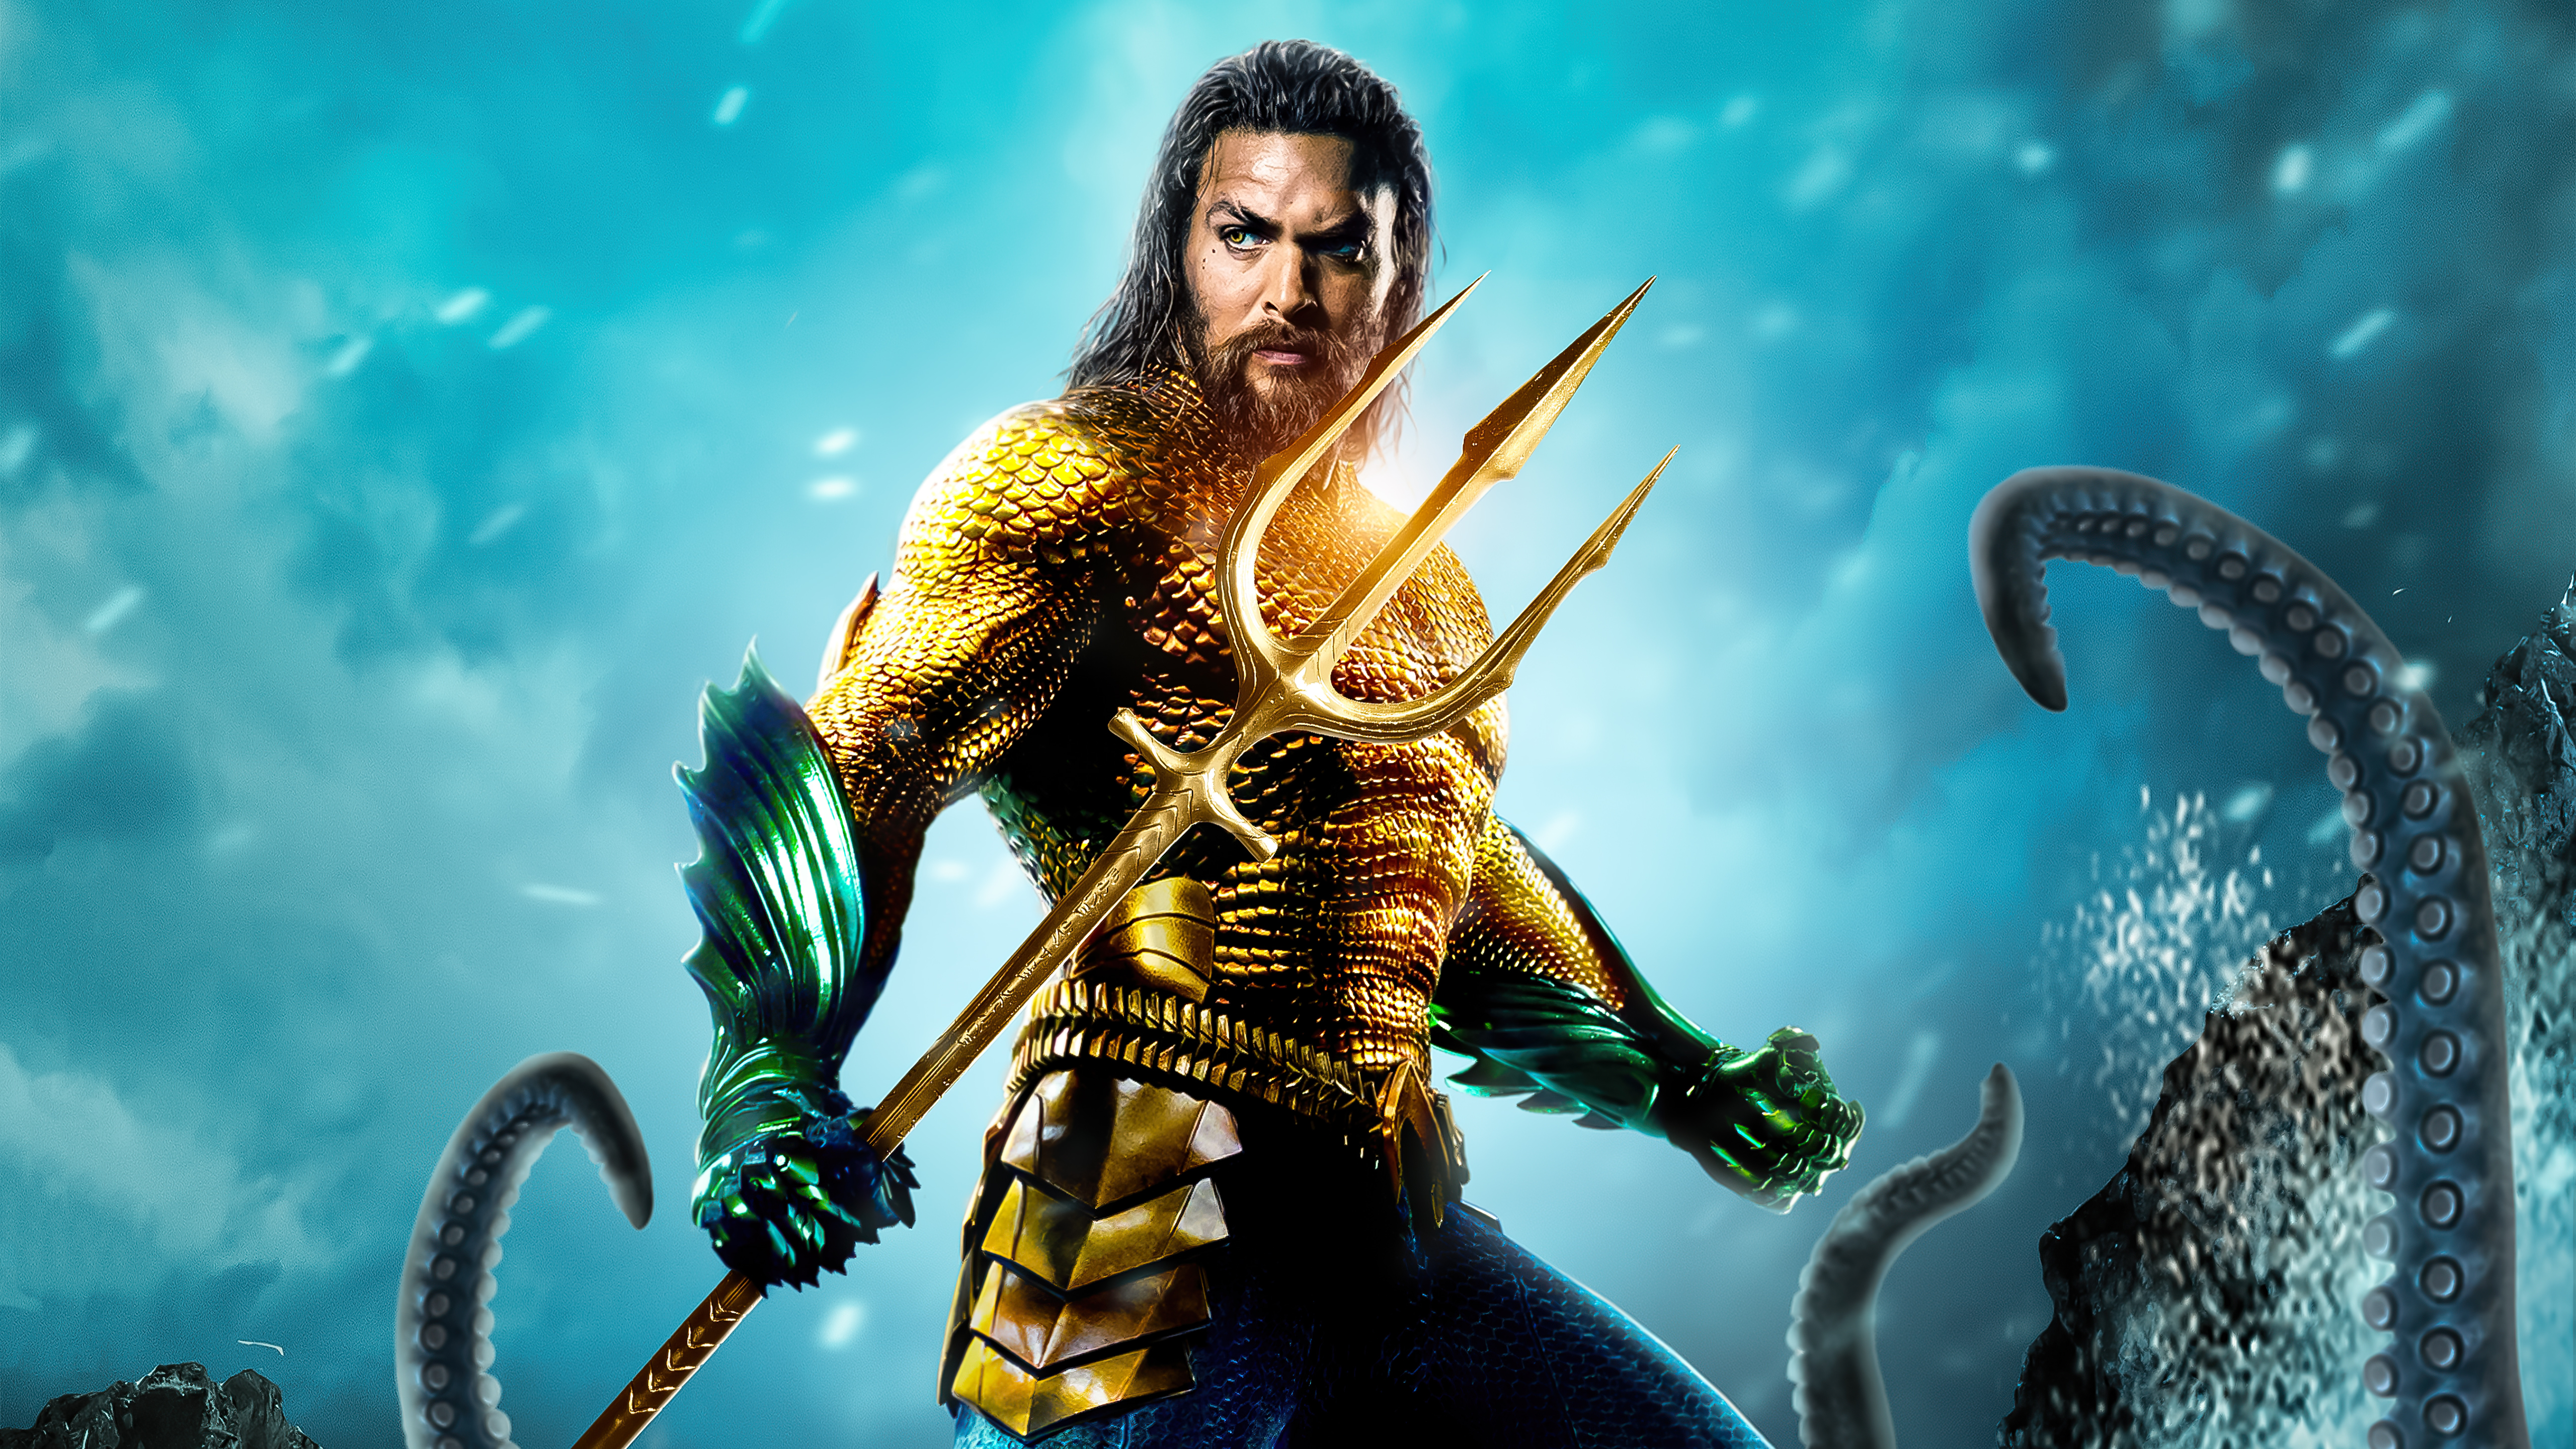 First teaser poster of Jason Momoa’s upcoming sequel spotted by fan at CinemaCon : Aquaman 2